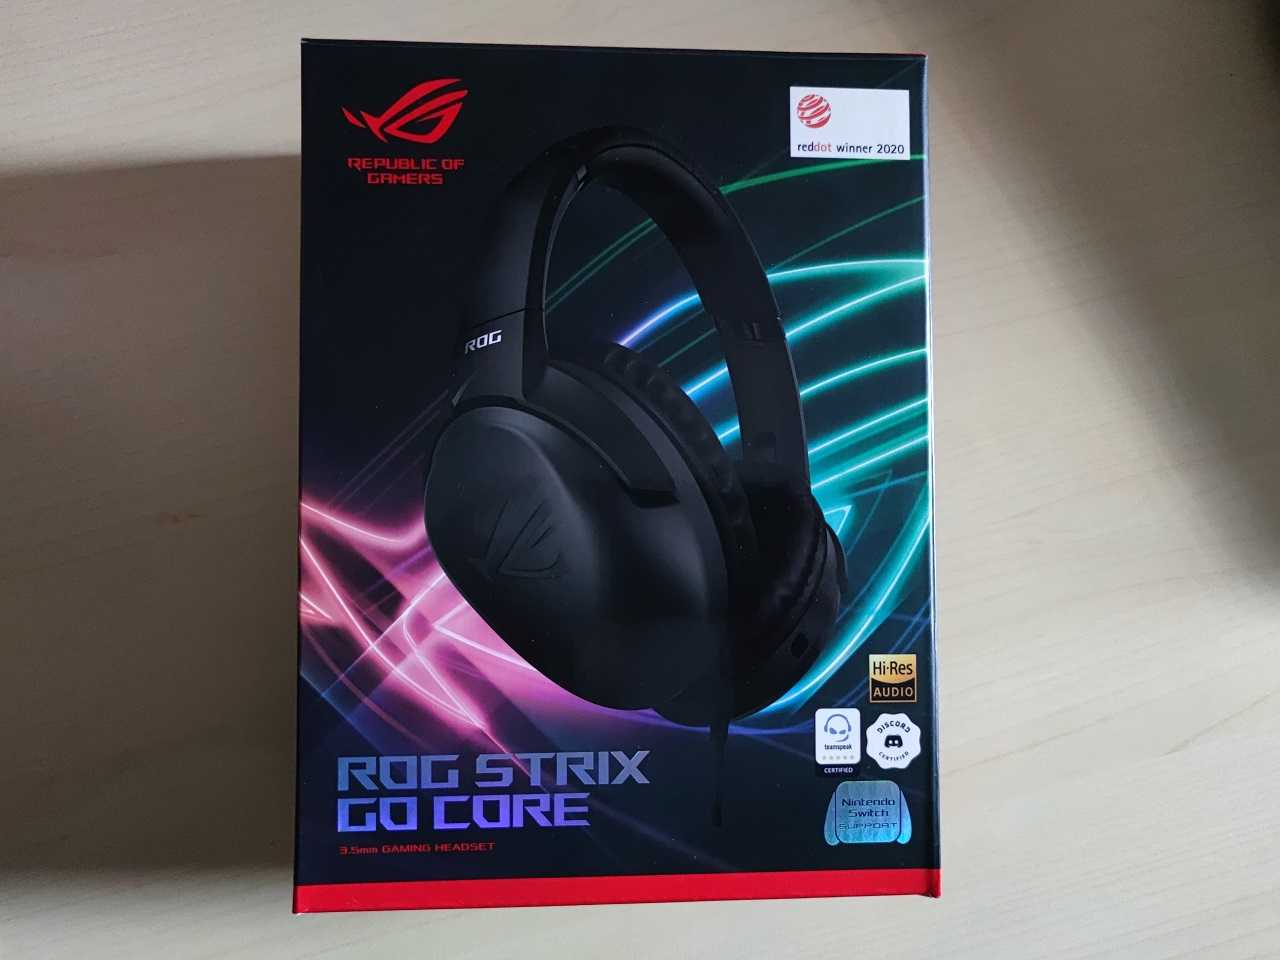 Asus Strix Go Core review: gaming headphones with great potential